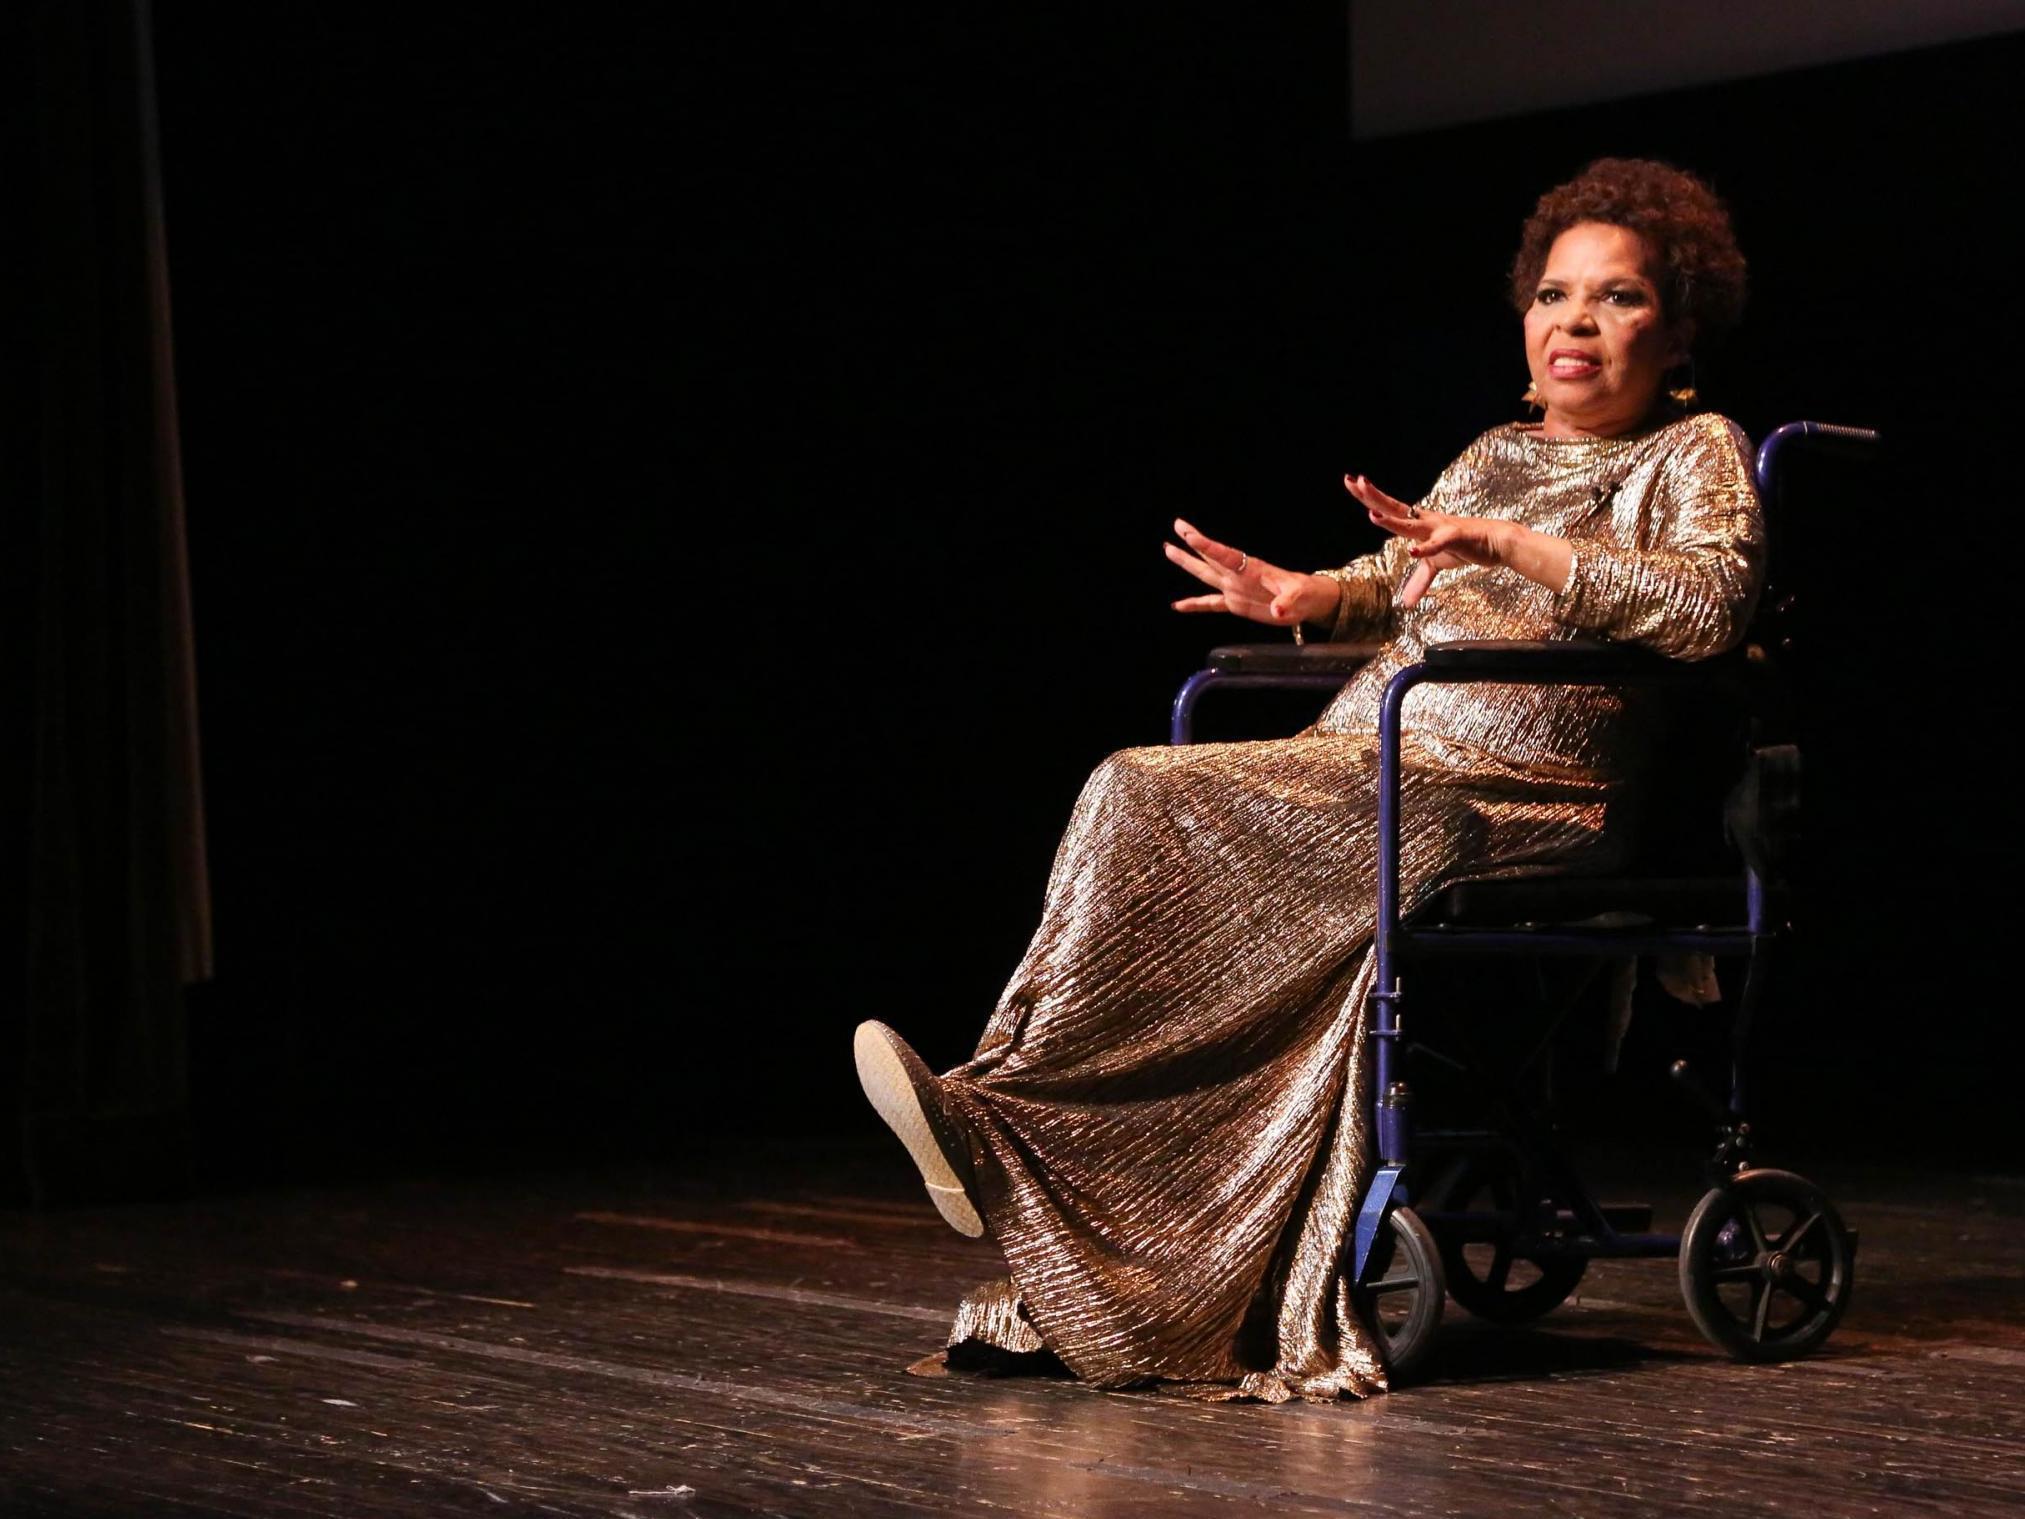 Shange marking the 40th anniversary of ‘For Colored Girls’ at an event in New York in 2014